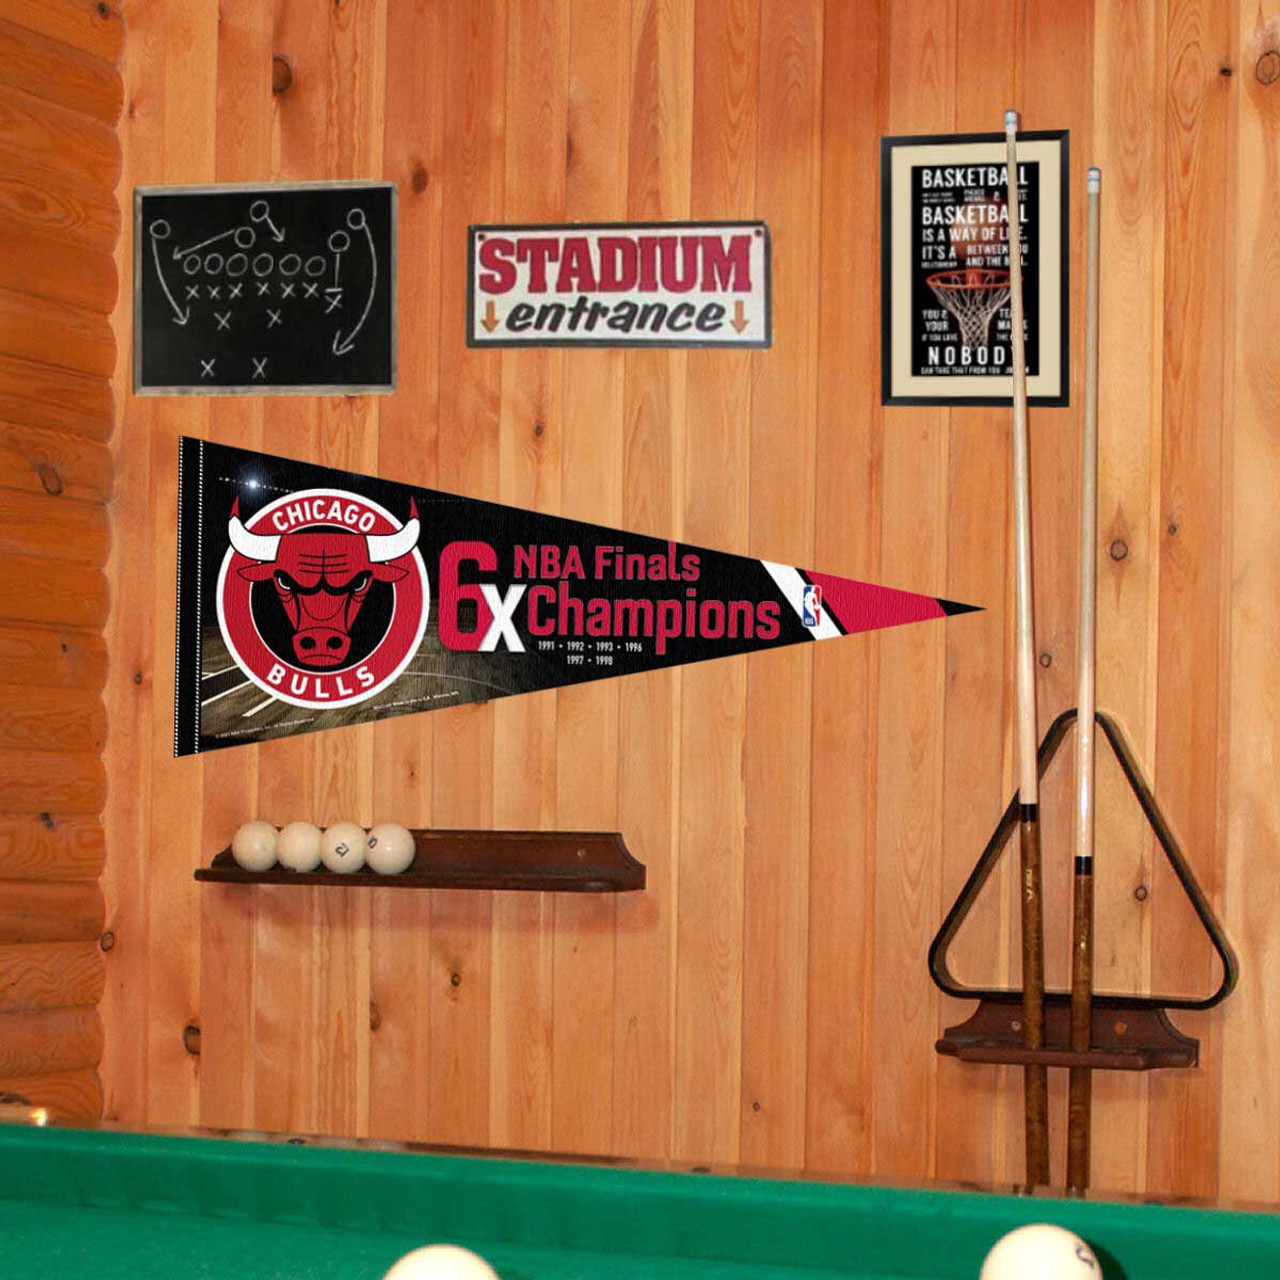 Chicago Bulls 6 Time NBA Champions Double Sided Garden Flag